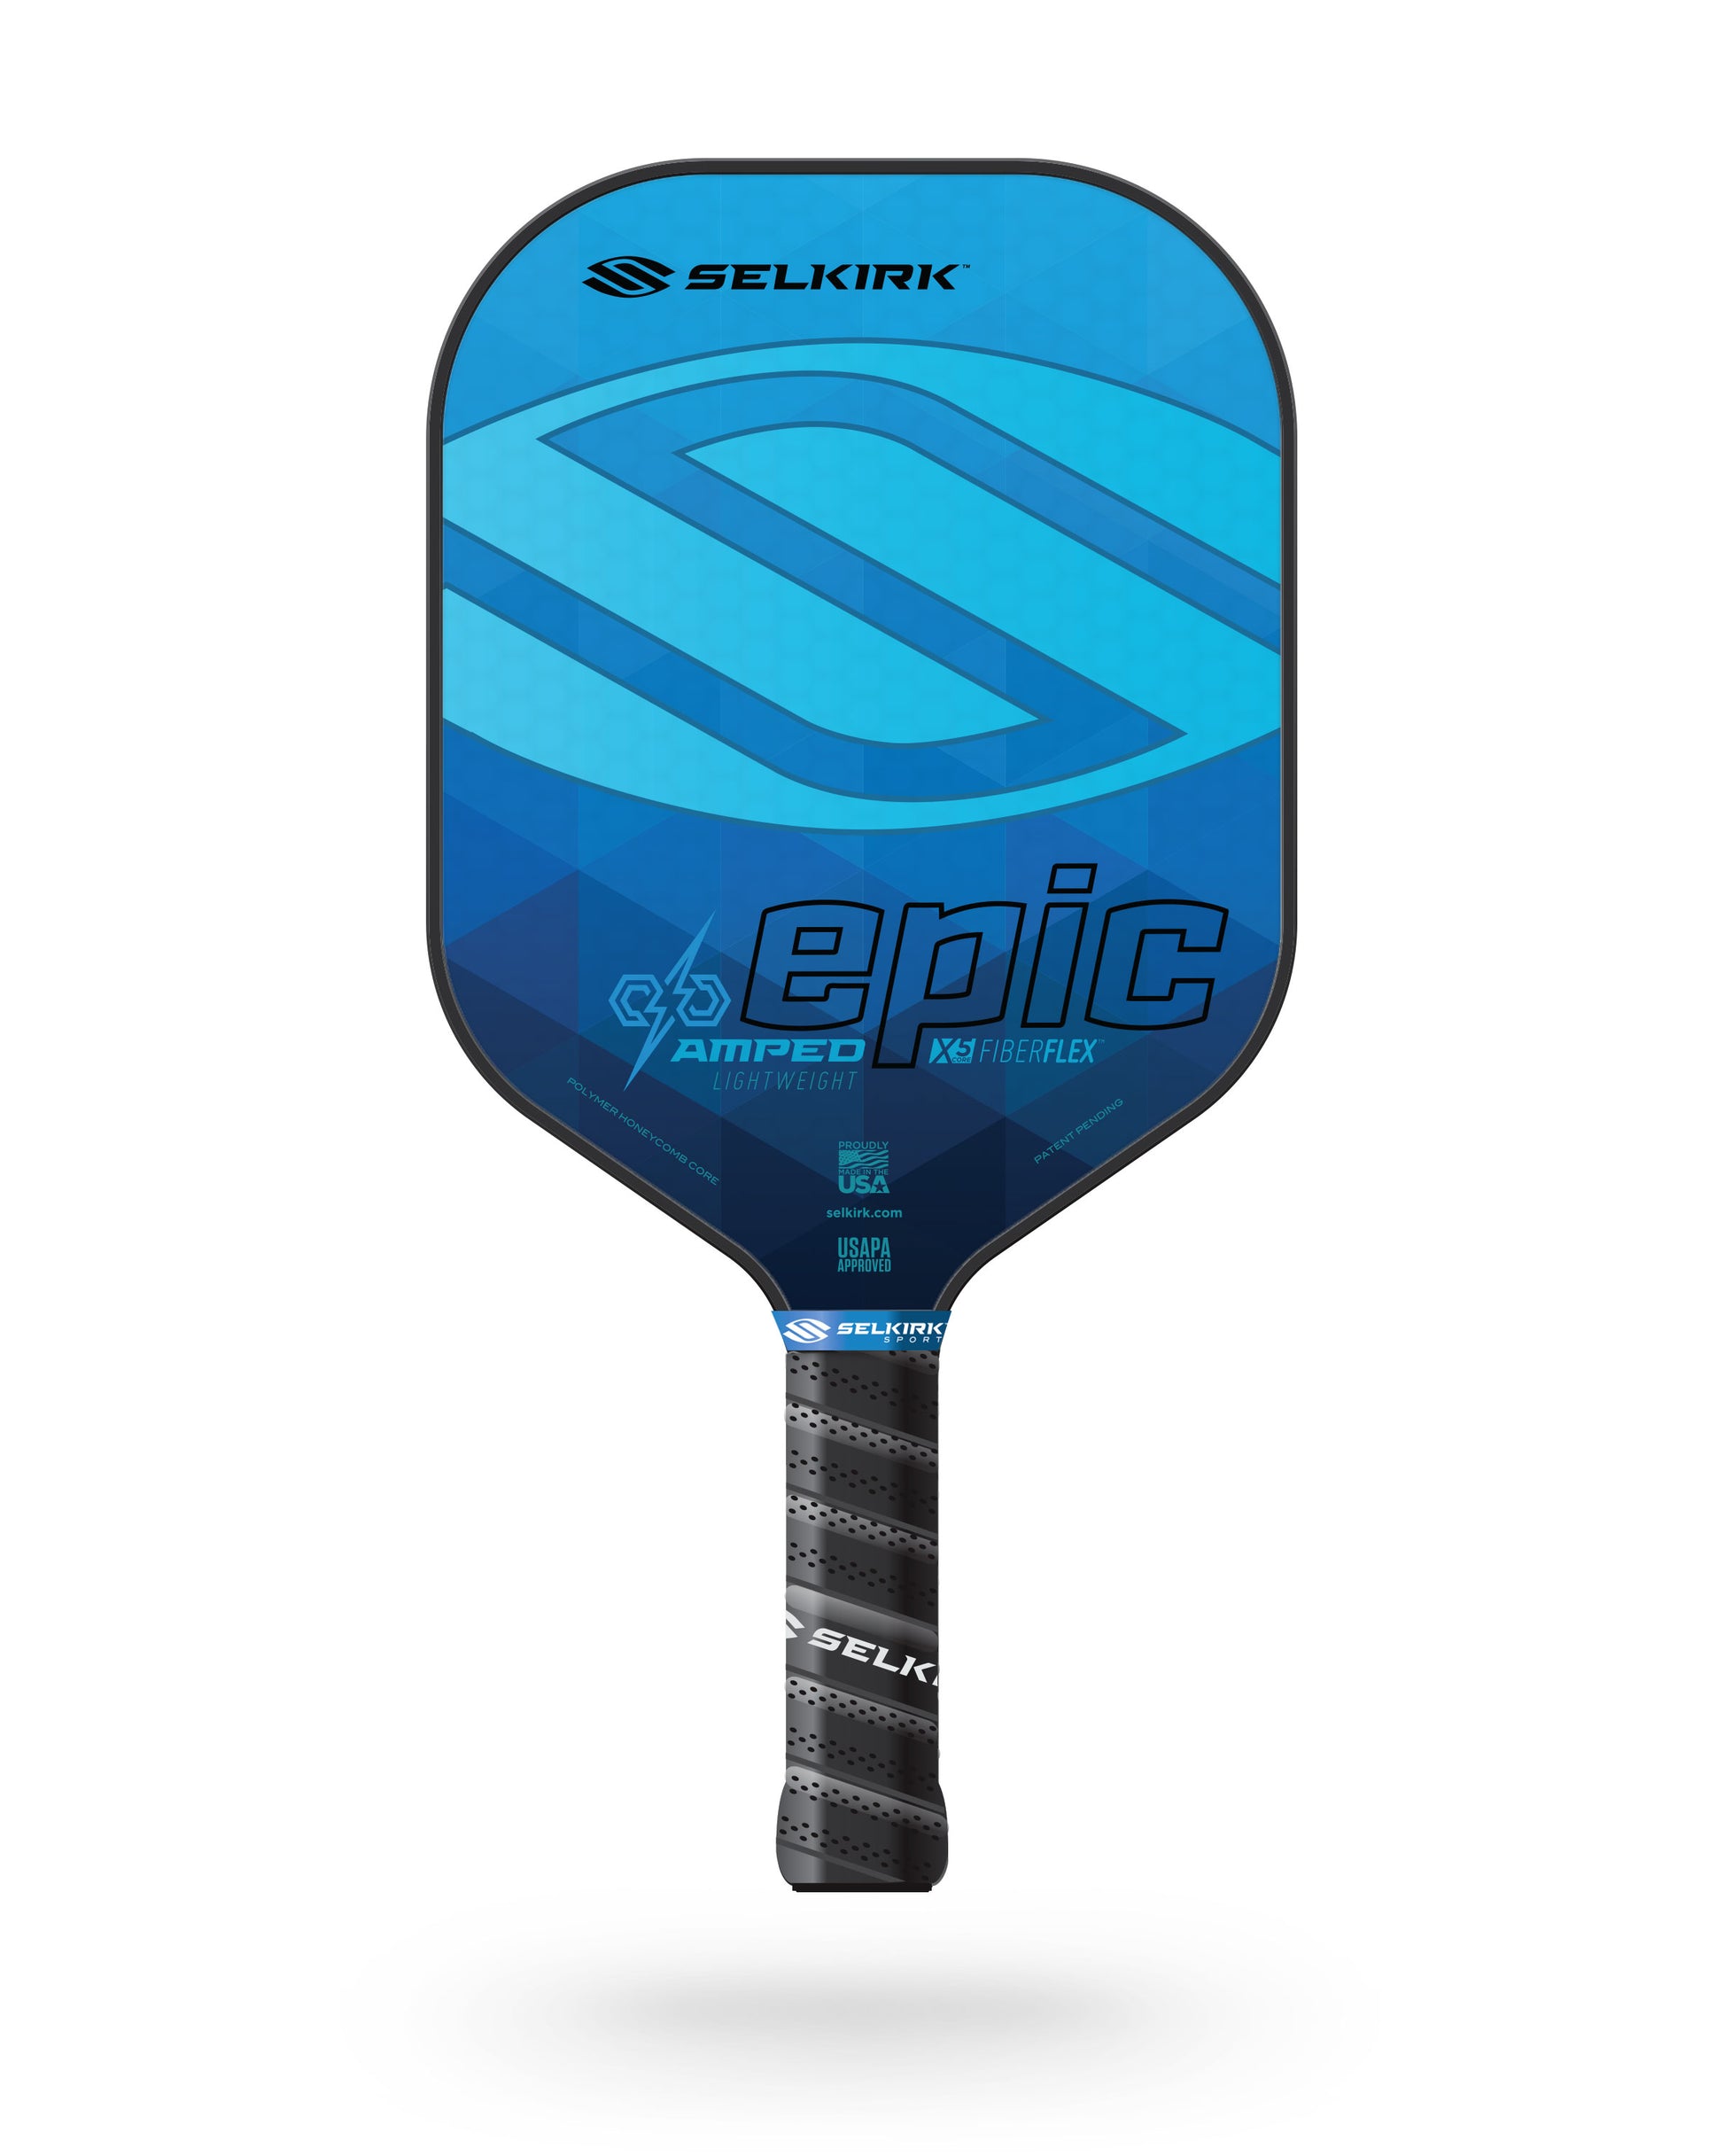 Selkirk AMPED Epic pickleball paddle in light blue and teal